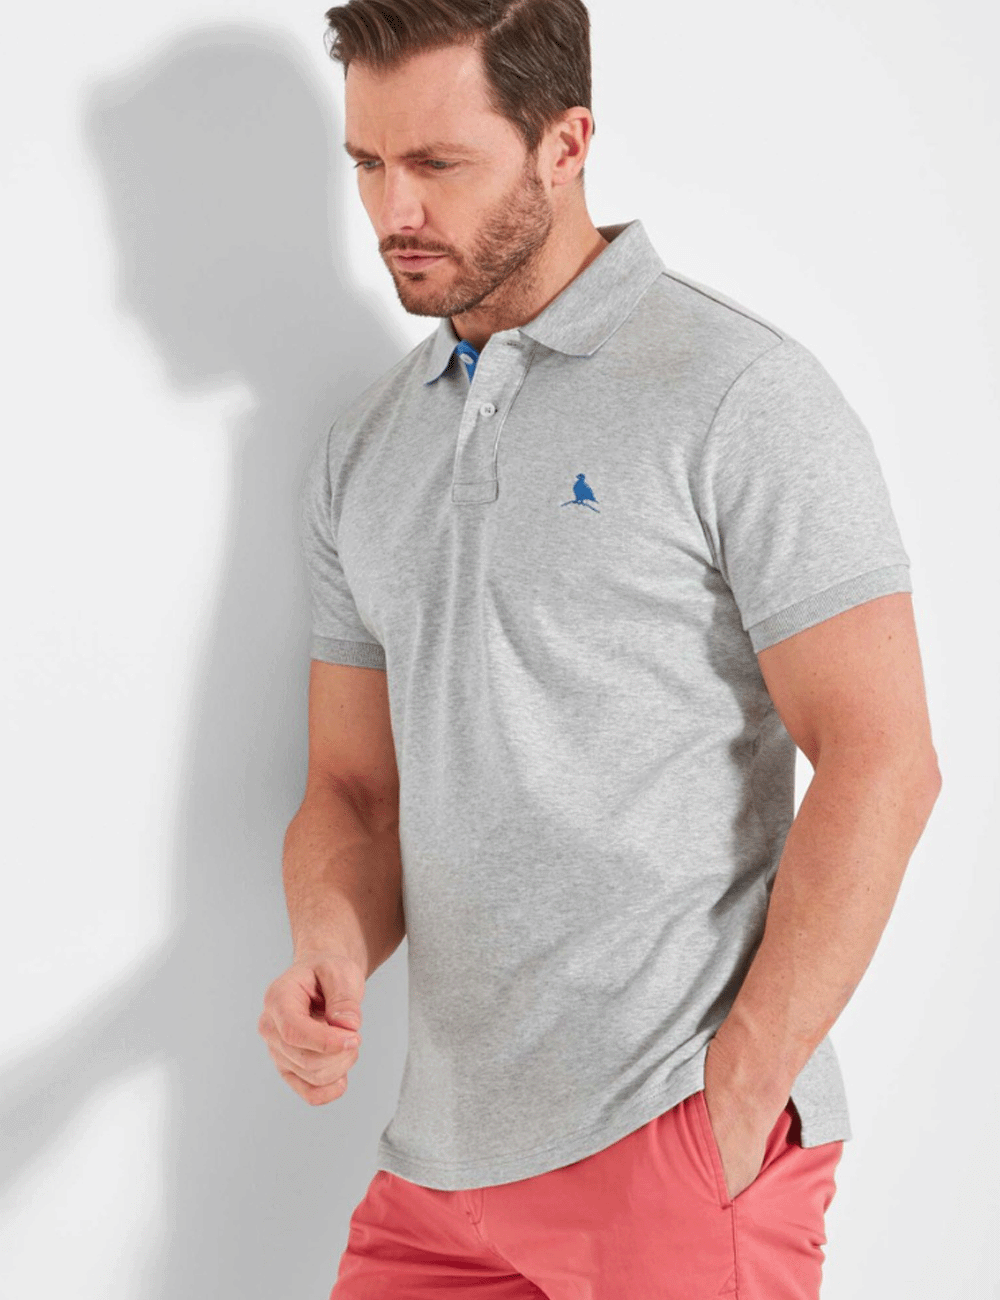 Man leaning against a white wall wearing the St. Ives Polo